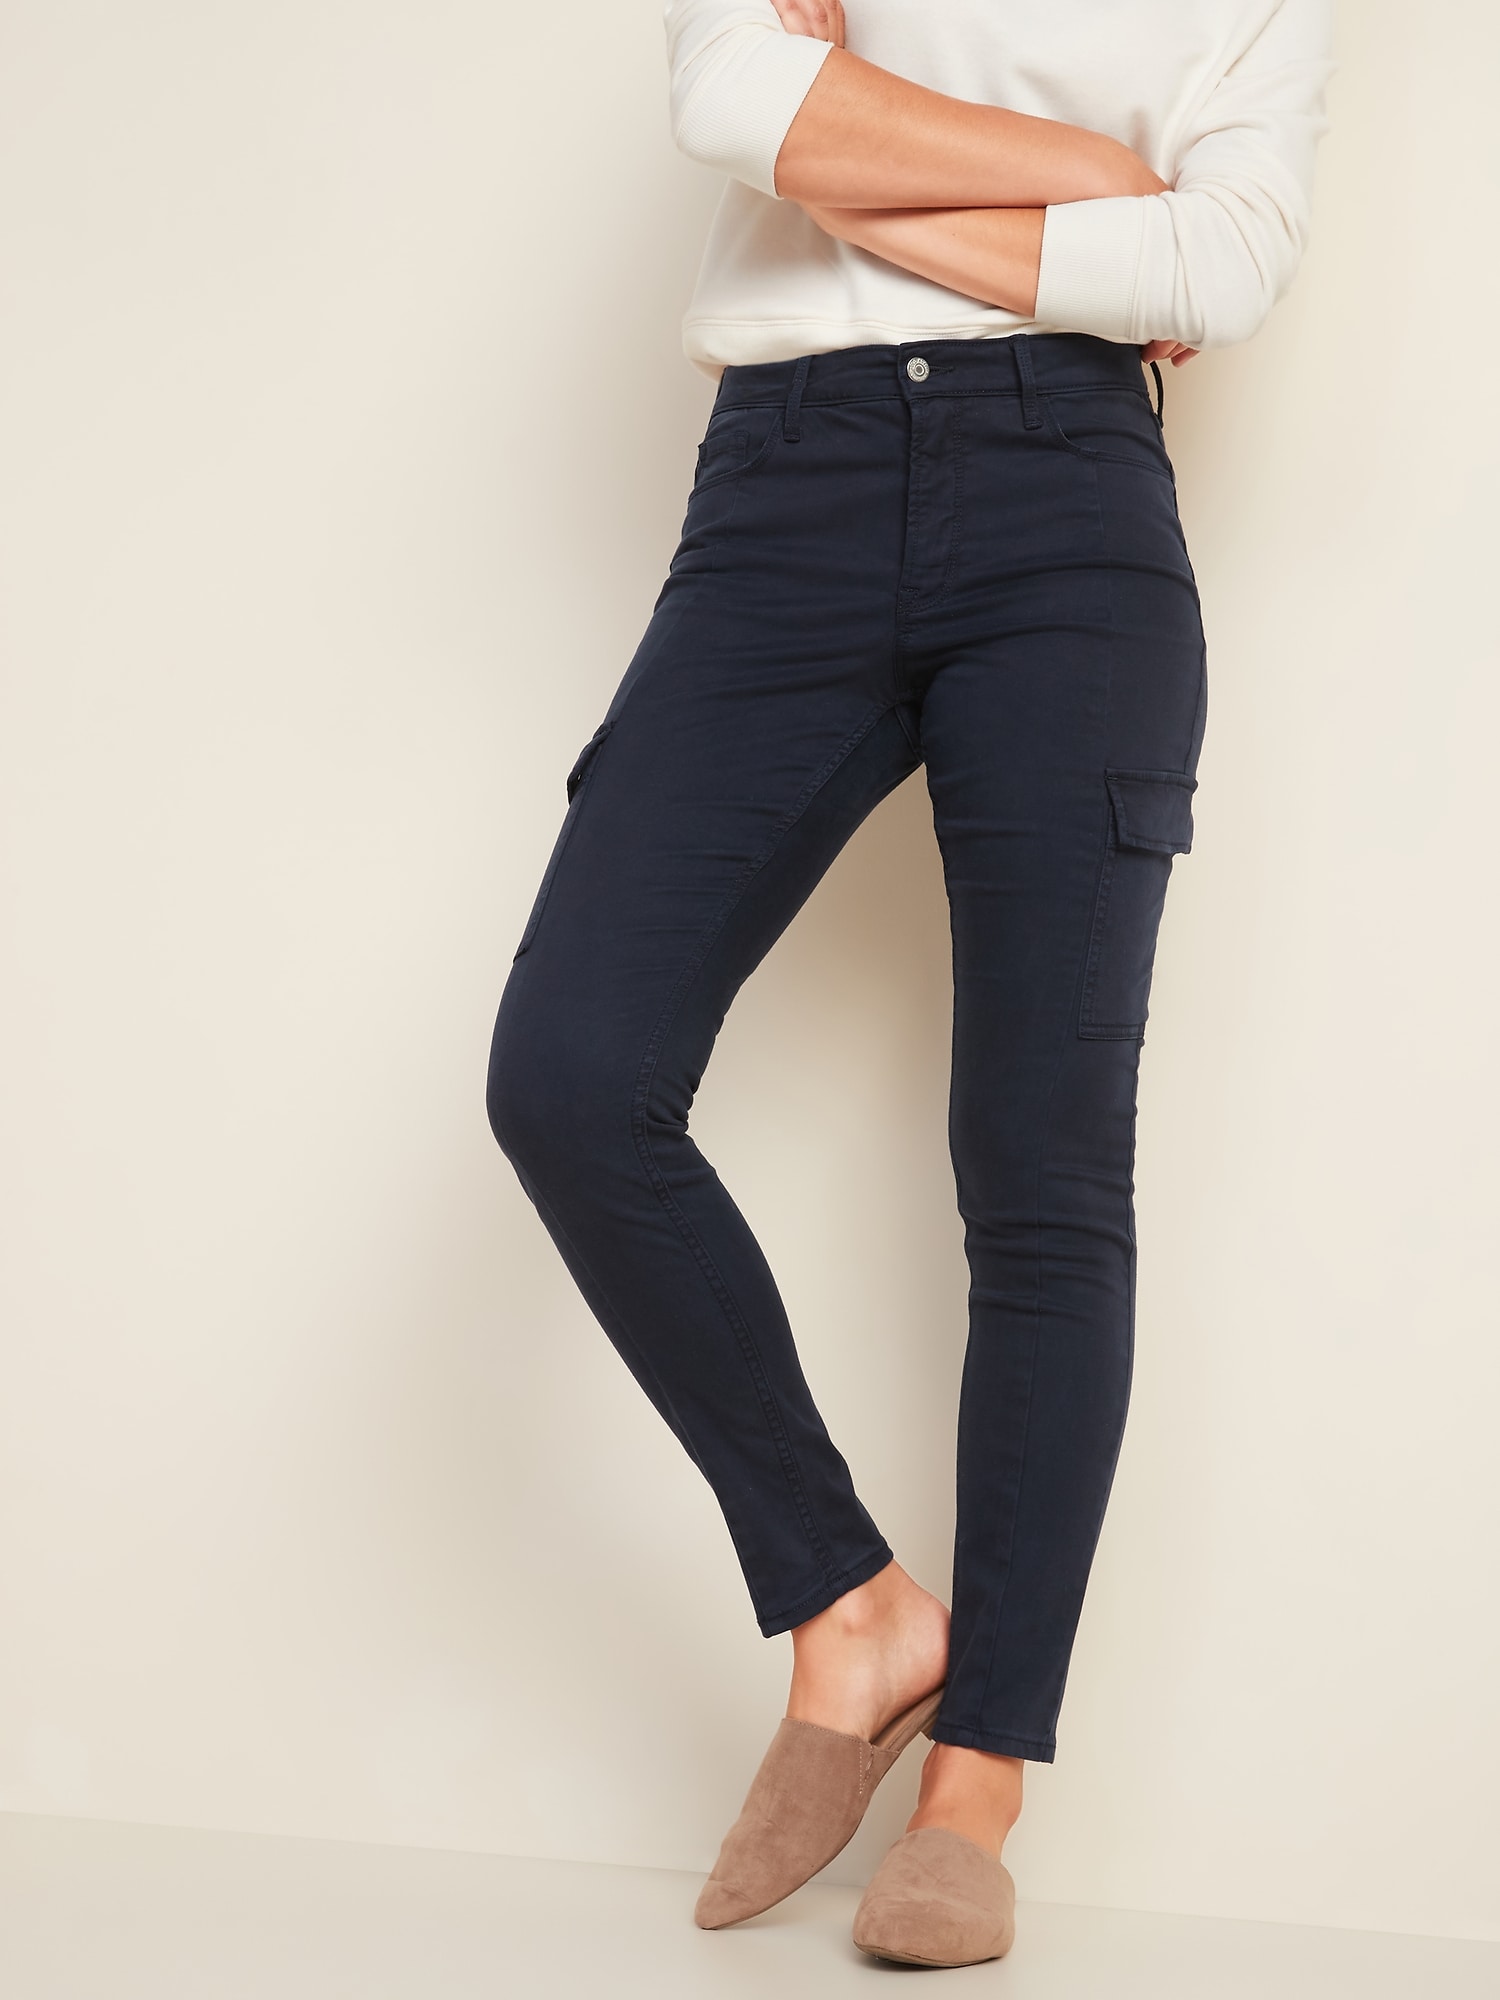 old navy sateen jeans